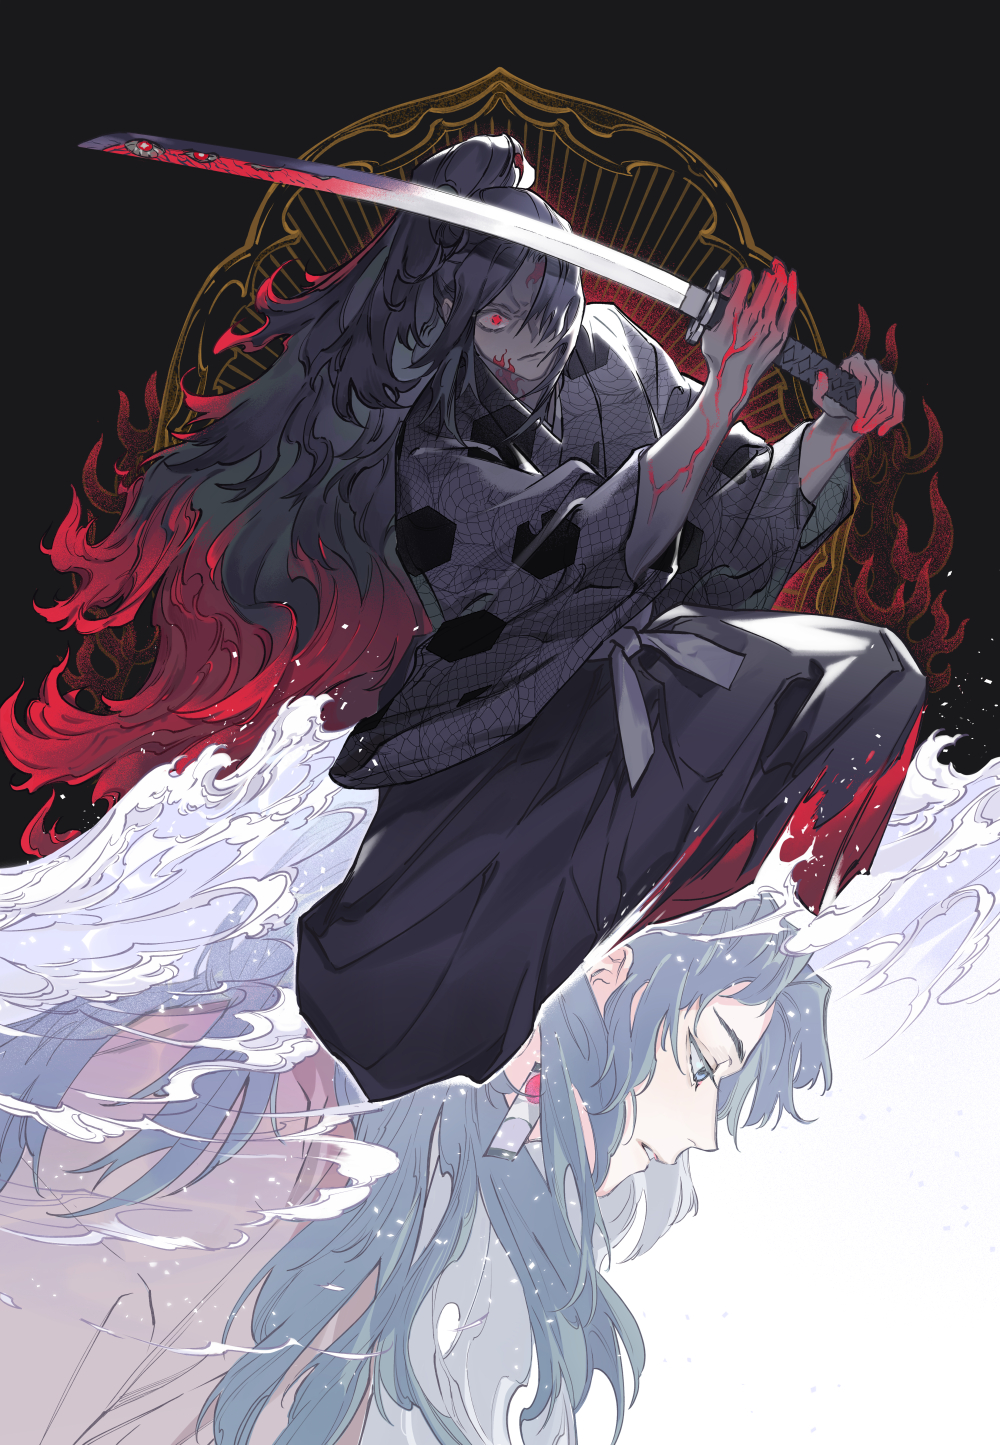 2boys angry black_background black_hair blood blood_on_clothes blood_on_hands brothers earrings extra_eyes facial_mark fighting_stance furrowed_brow hakama hanafuda hands_up highres holding holding_sword holding_weapon inkerpape japanese_clothes jewelry kimetsu_no_yaiba kokushibou long_hair long_sleeves looking_away multicolored_hair multiple_boys one_eye_covered pale_skin ponytail profile projected_inset red_hair reflection siblings solo_focus spoilers sword tsugikuni_michikatsu tsugikuni_yoriichi two-tone_hair unsheathed veins veiny_arms veiny_hands very_long_hair waves weapon white_background